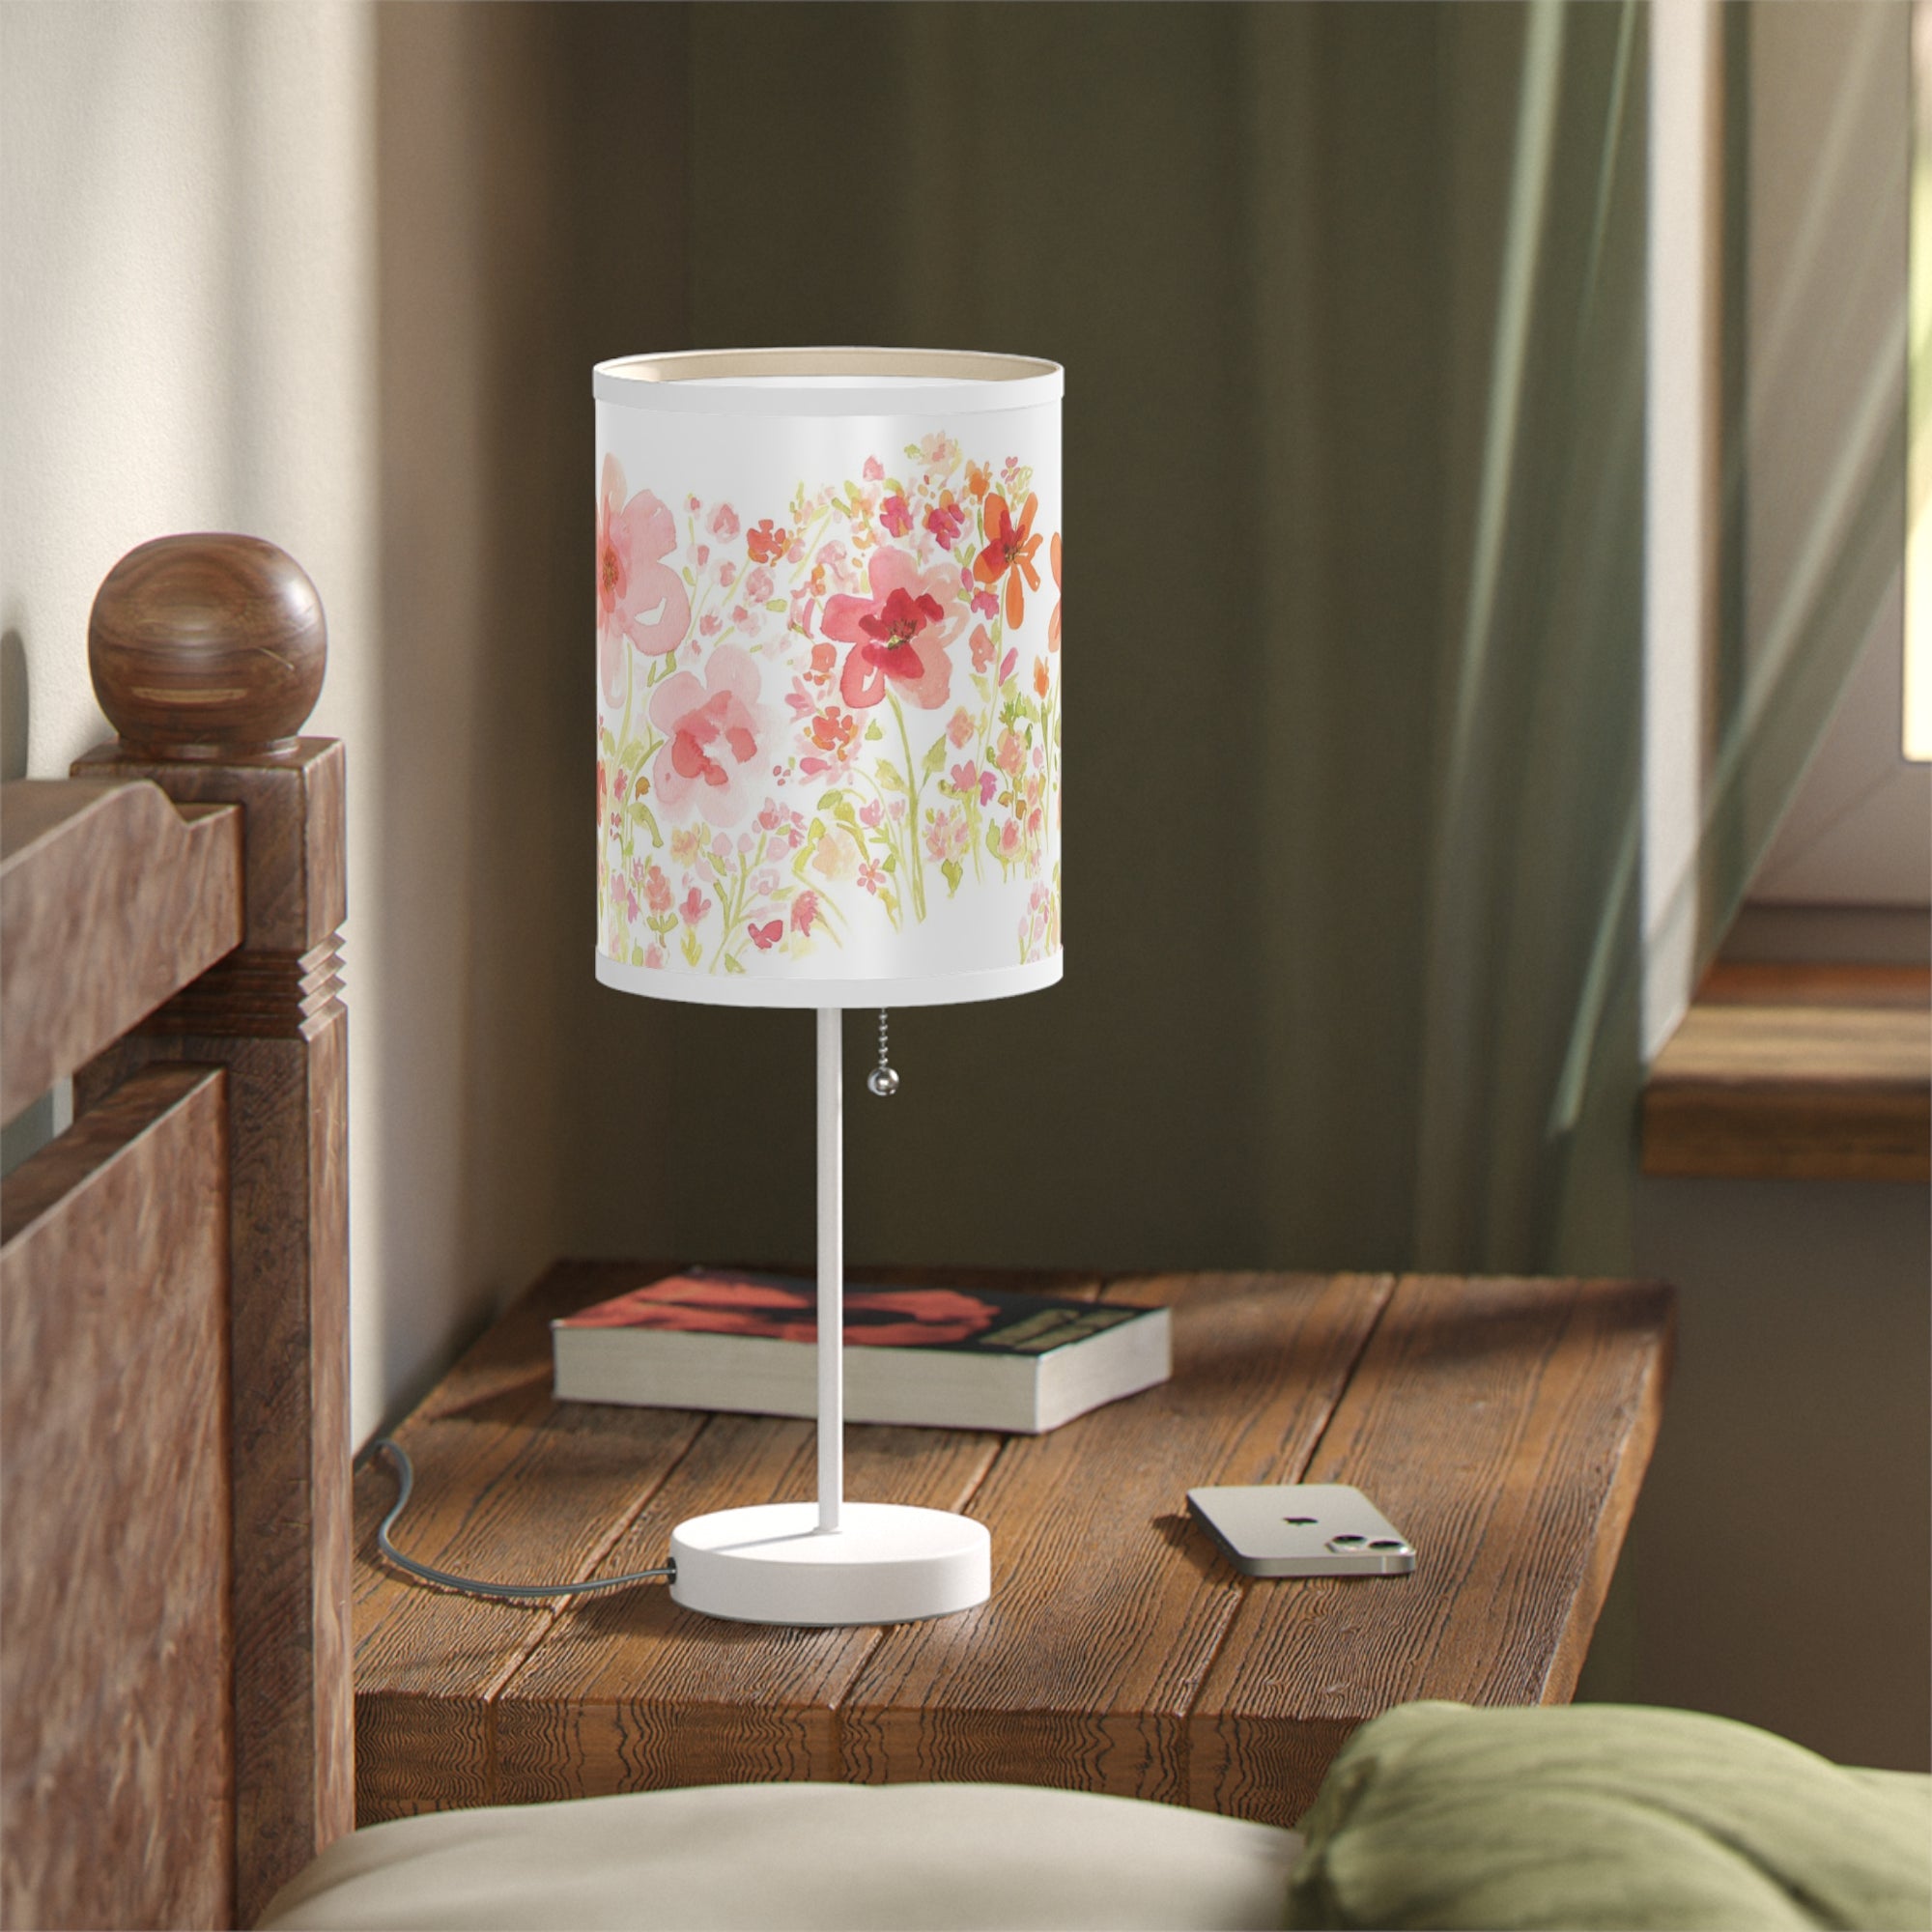 Orange Floral Lamp on a Stand | Flower Fields Lamp